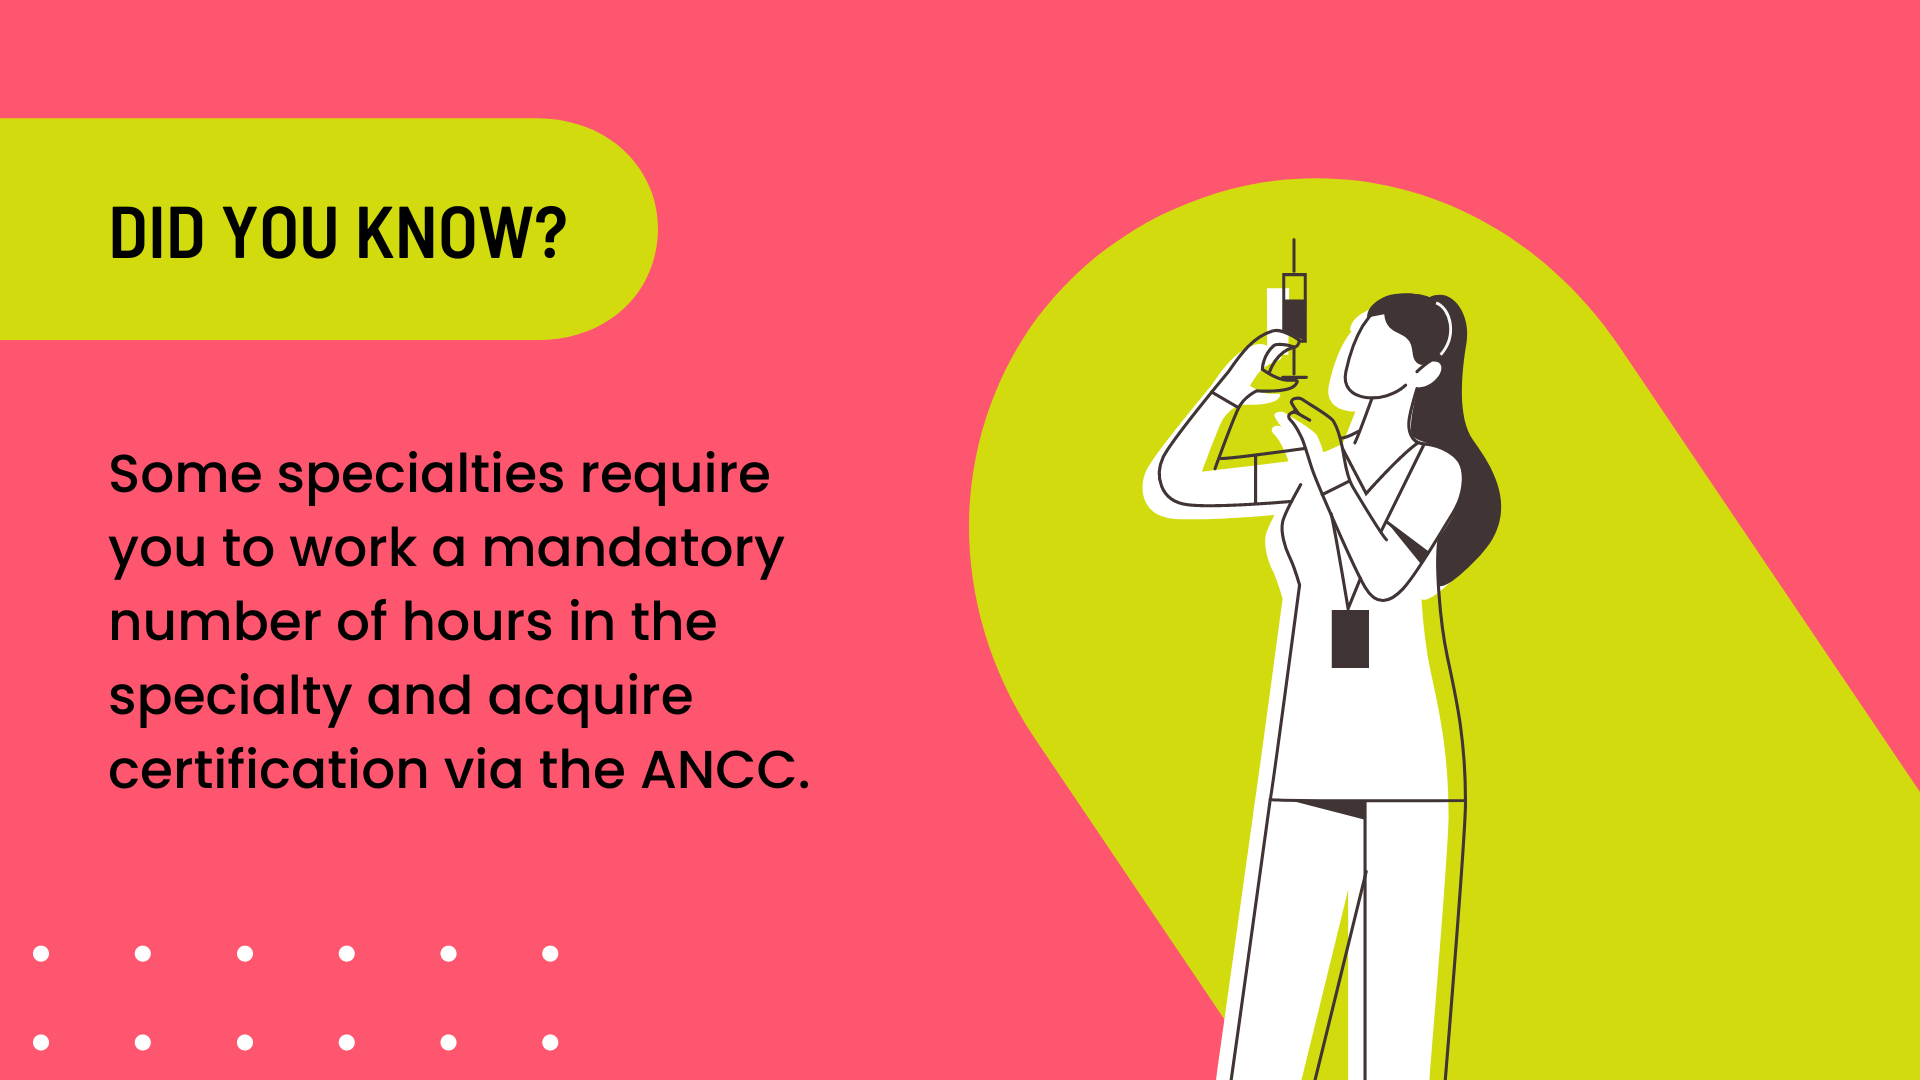 Did you know? Some specialties require you to work a mandatory number of hours in the specialty and acquire certification via the ANCC.